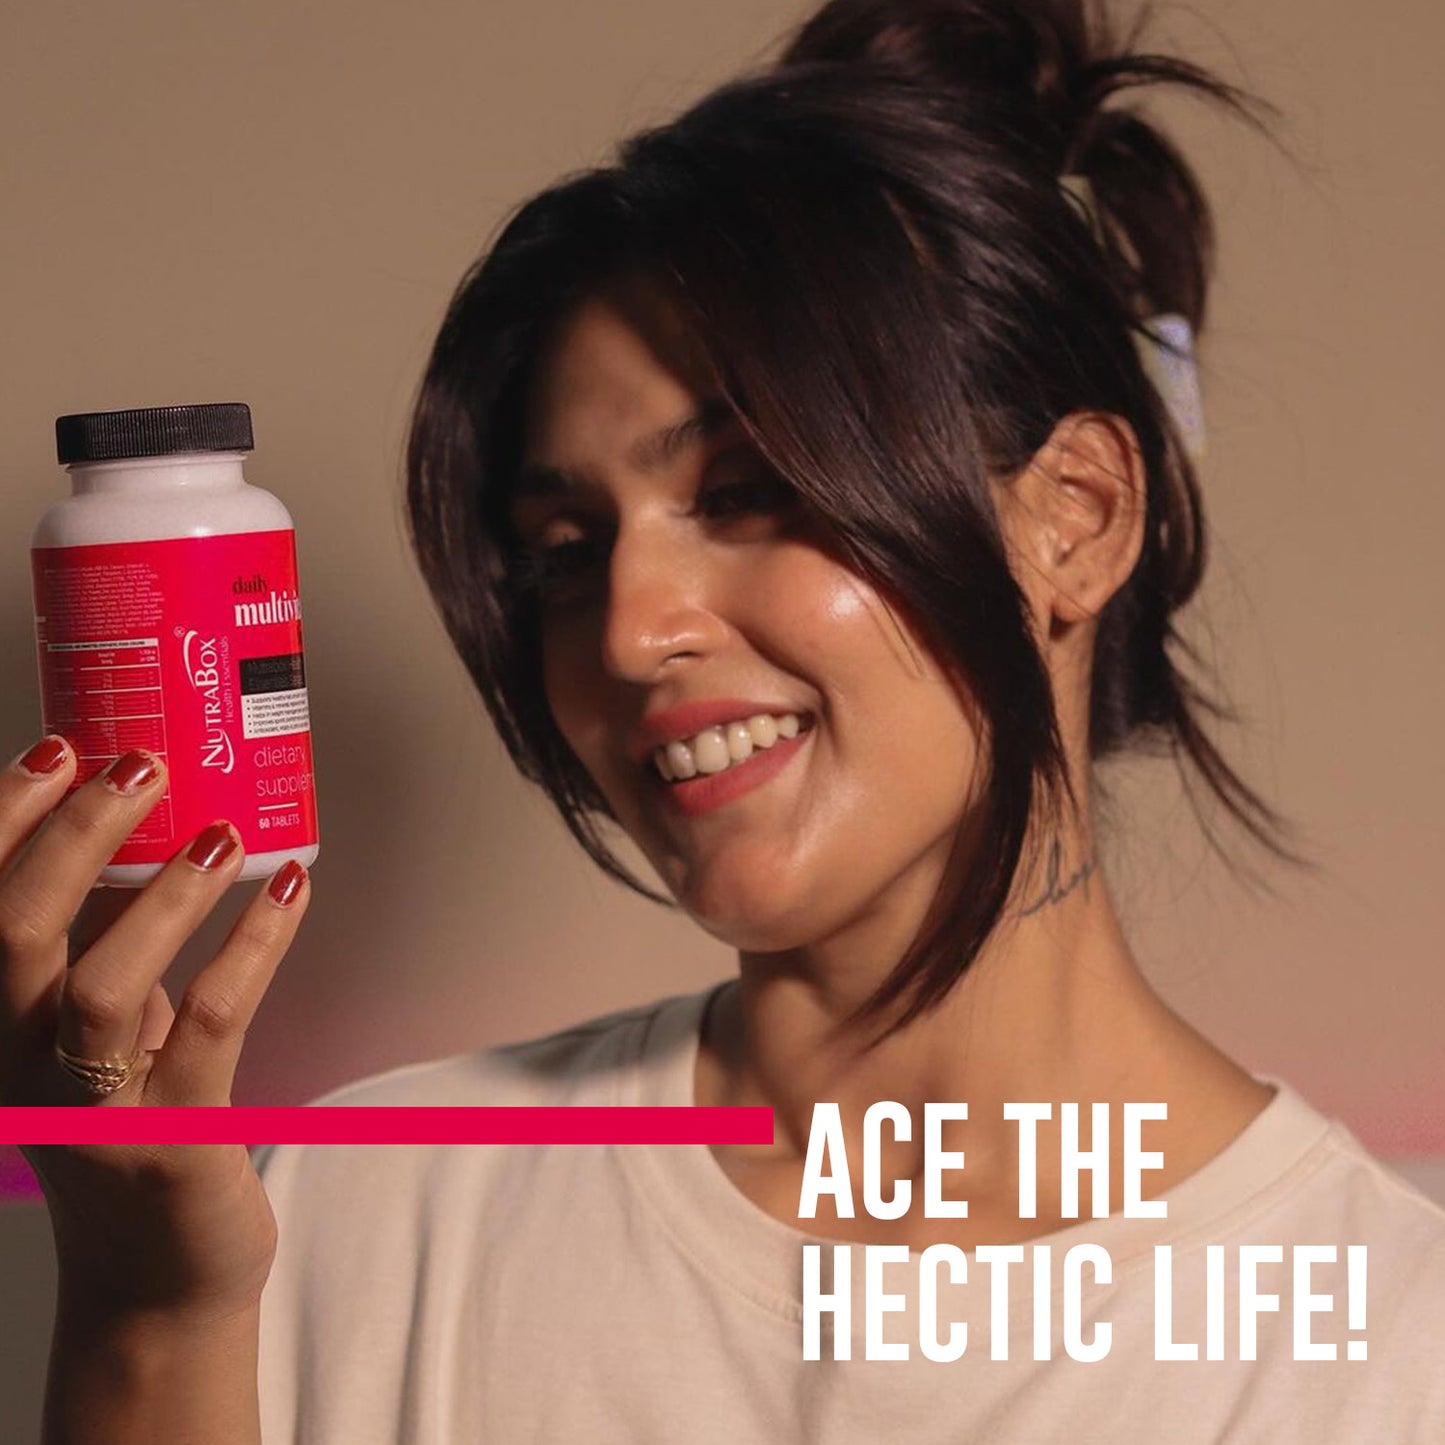 Ace the hectic life with Daily Multivitamins for Women